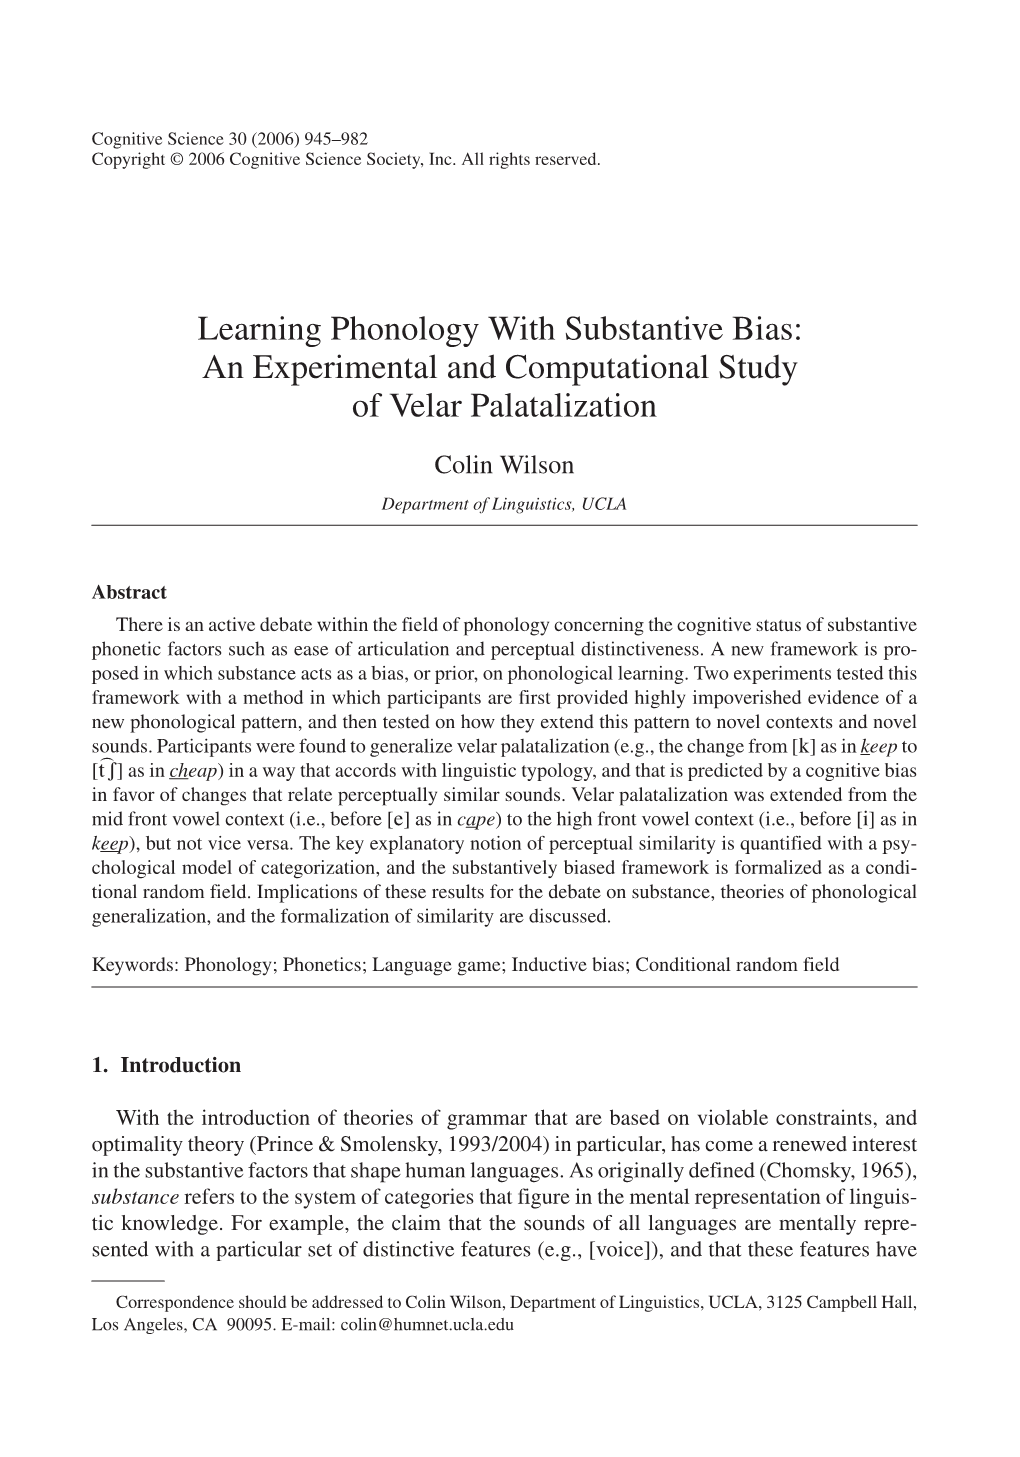 Learning Phonology with Substantive Bias: an Experimental and Computational Study of Velar Palatalization